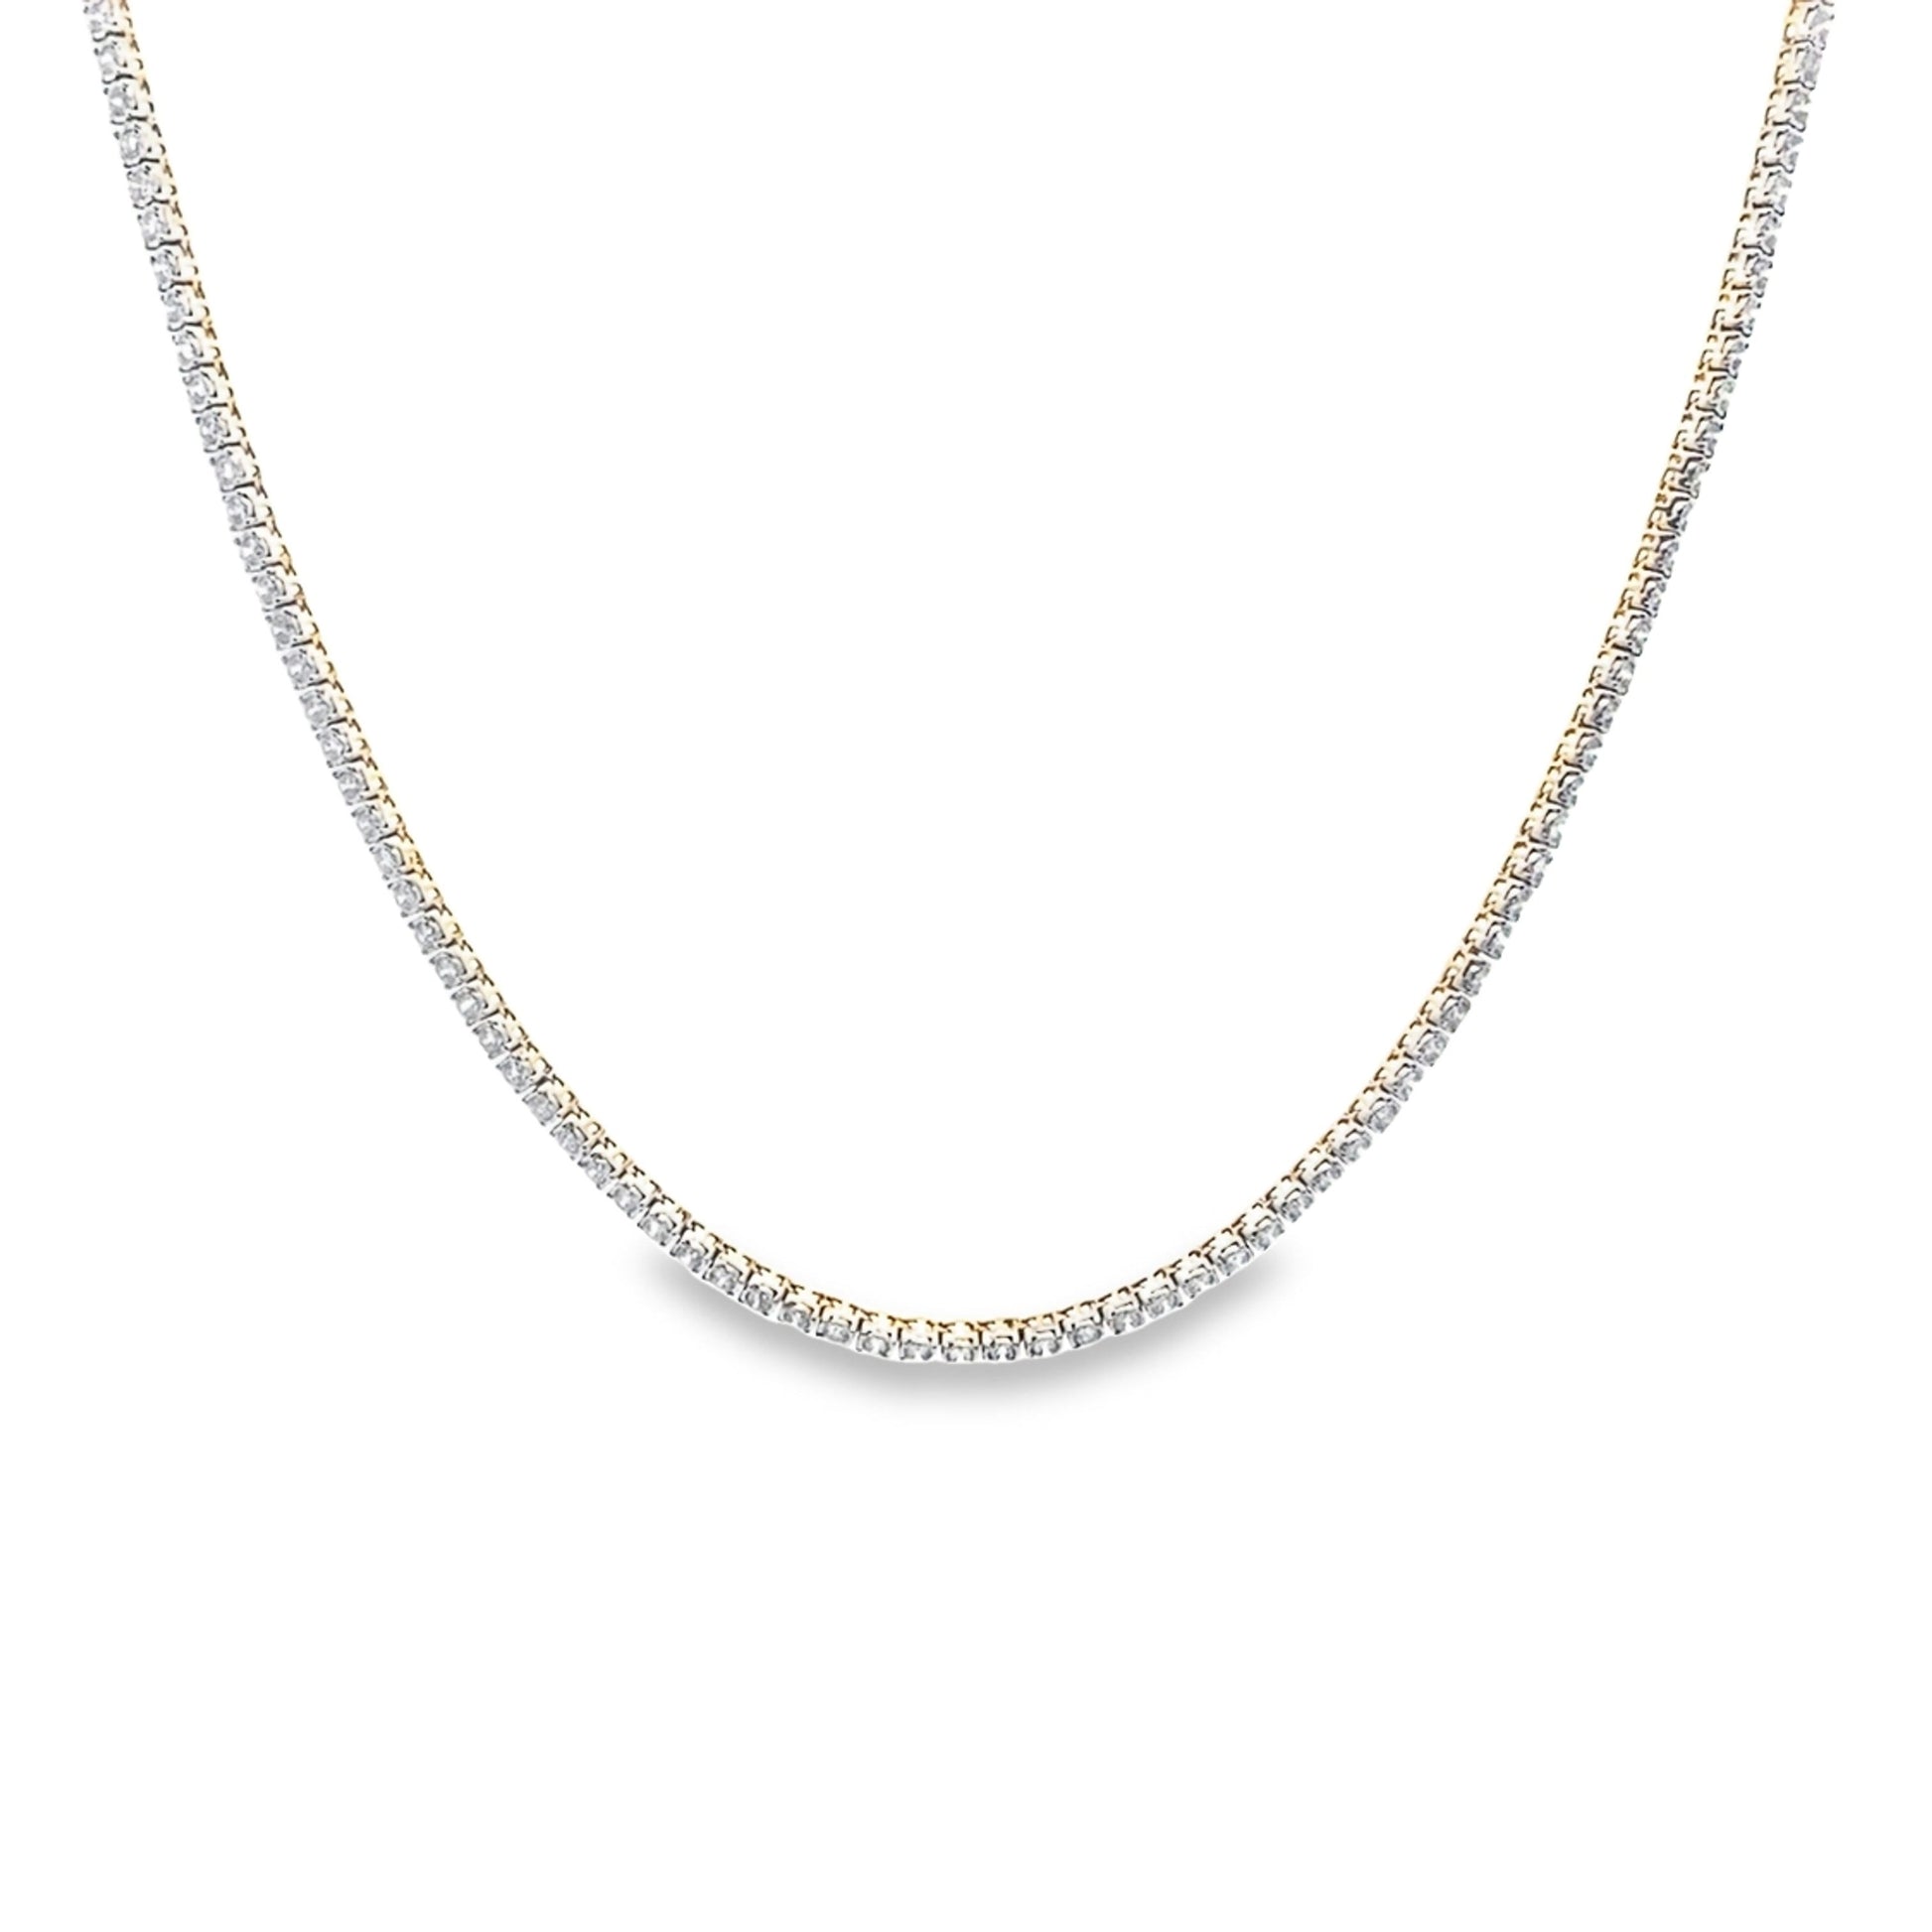 5.00Ct 10K Yellow Gold Diamond Tennis Necklace 18In 13.6Dwt